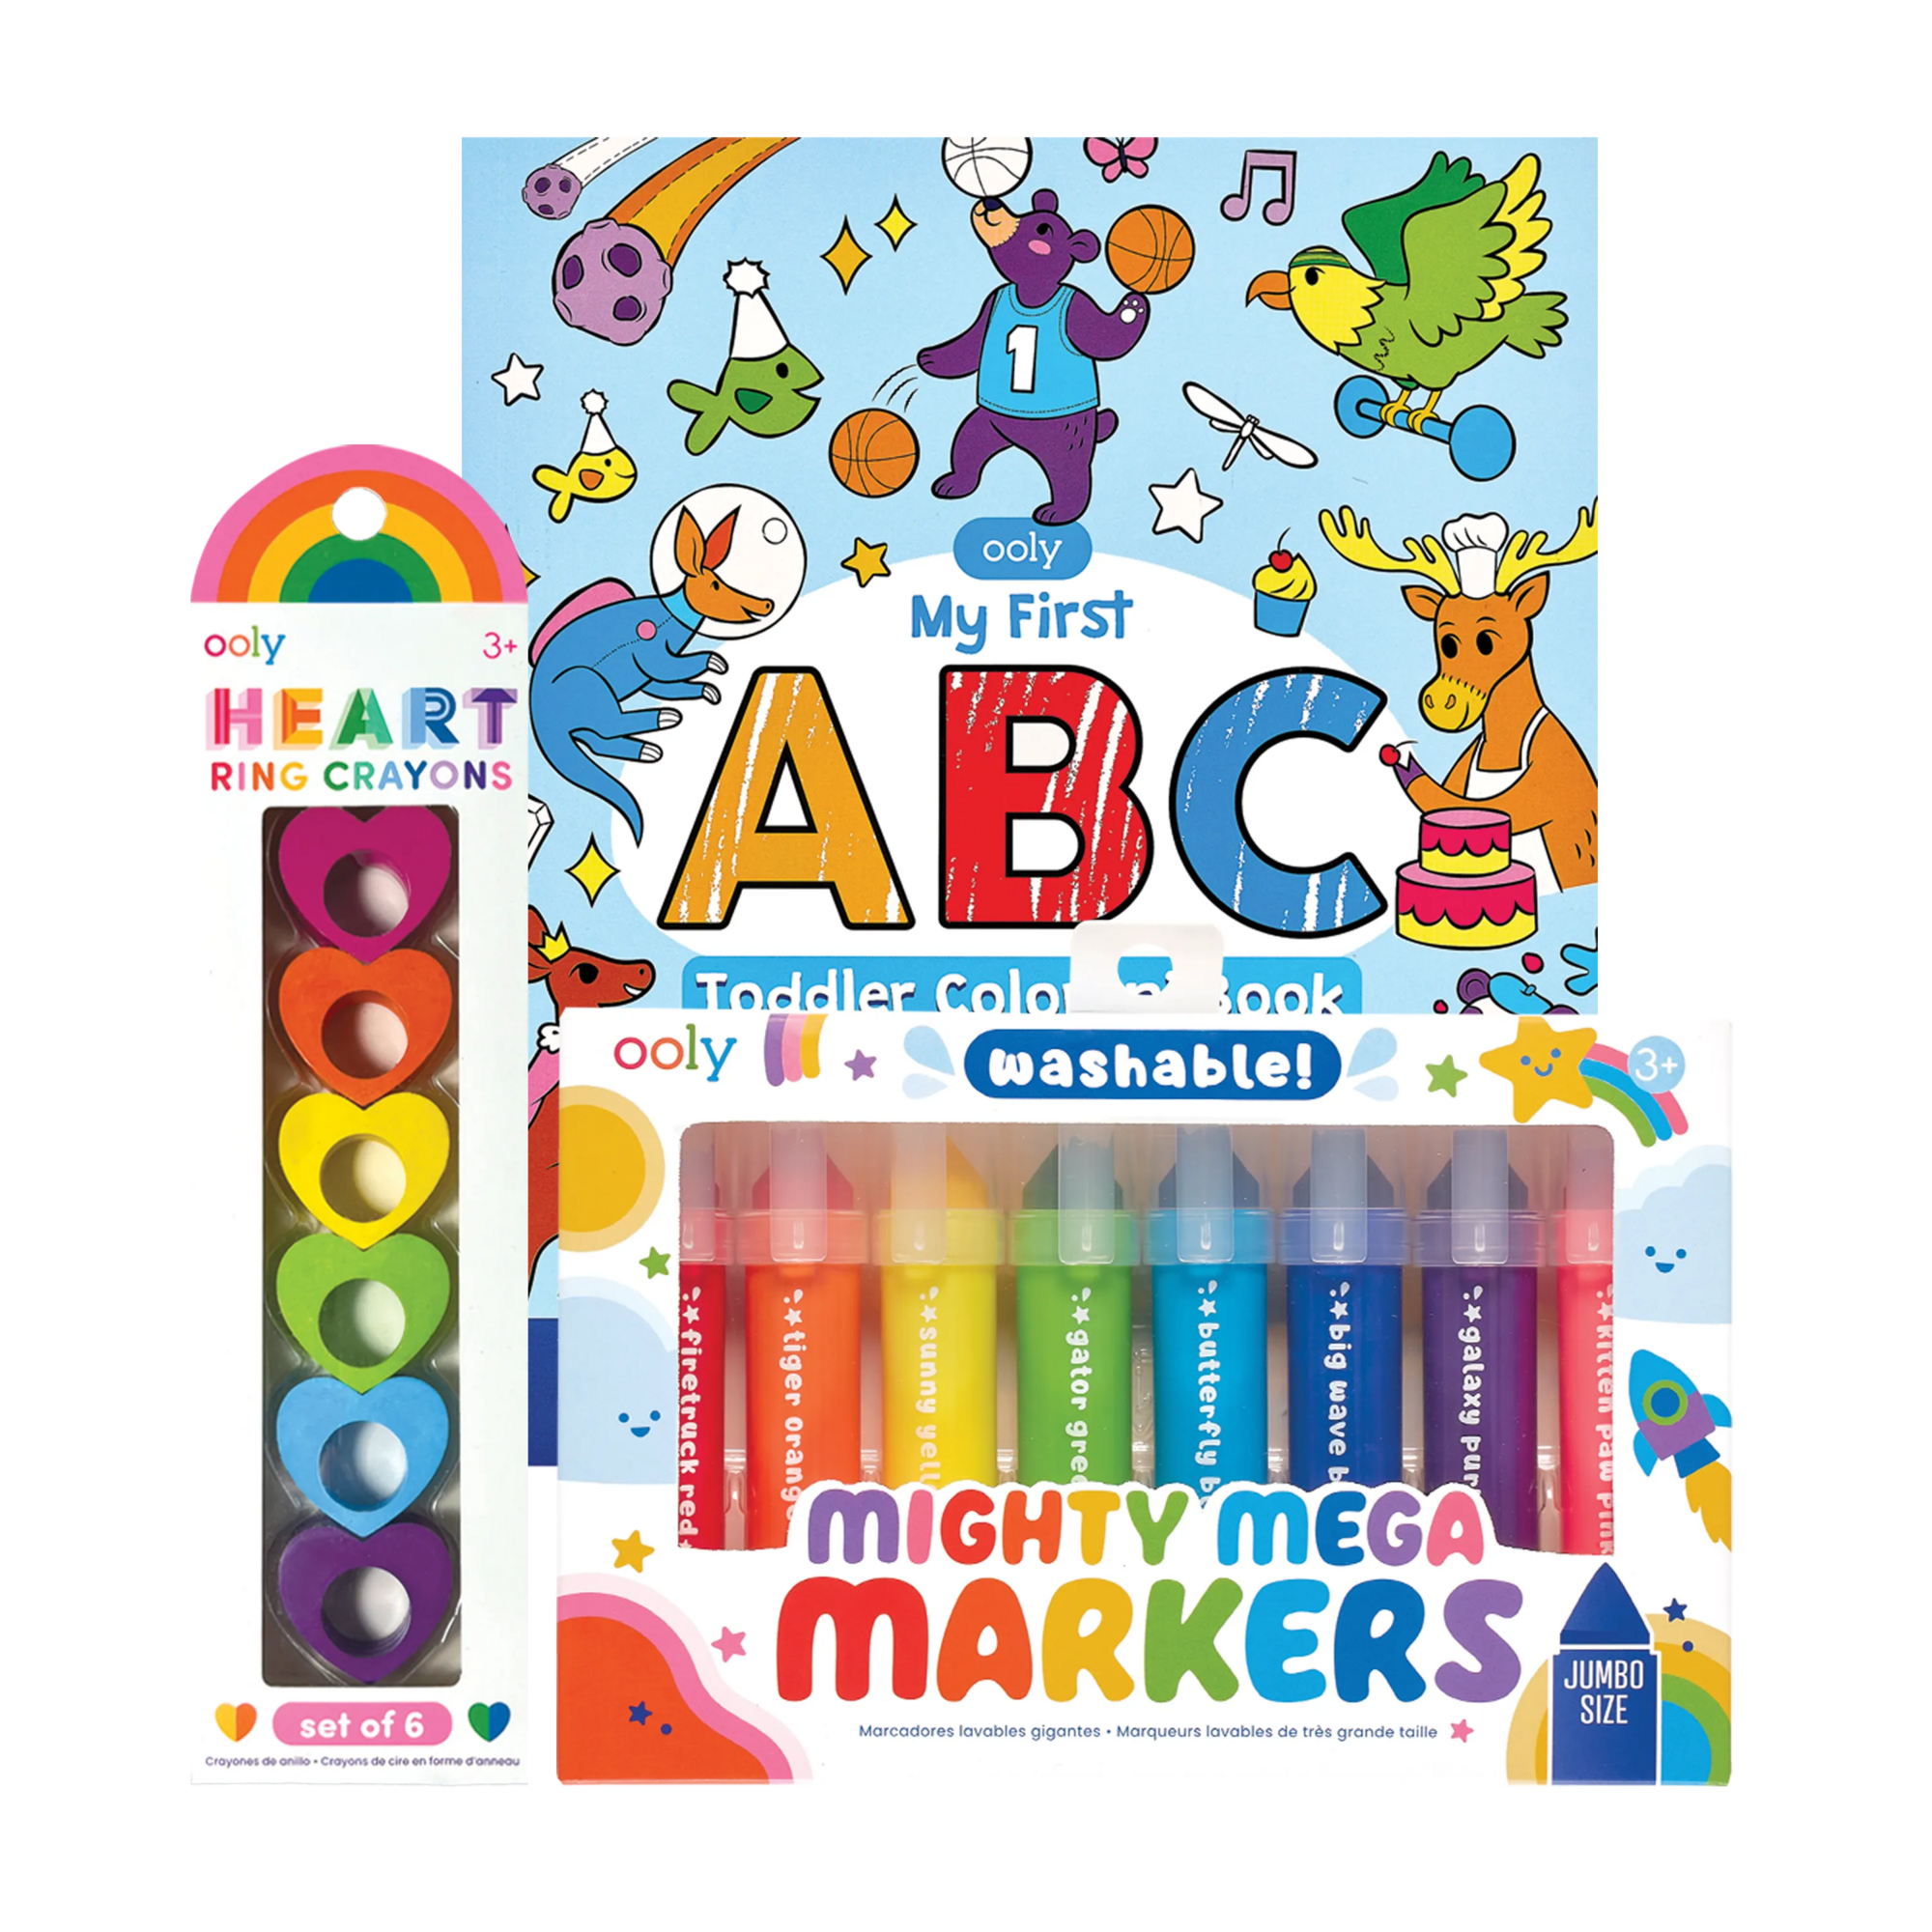 OOLY Toddler Fun Gift Set out of gift wrap - ring crayons, markers and coloring book